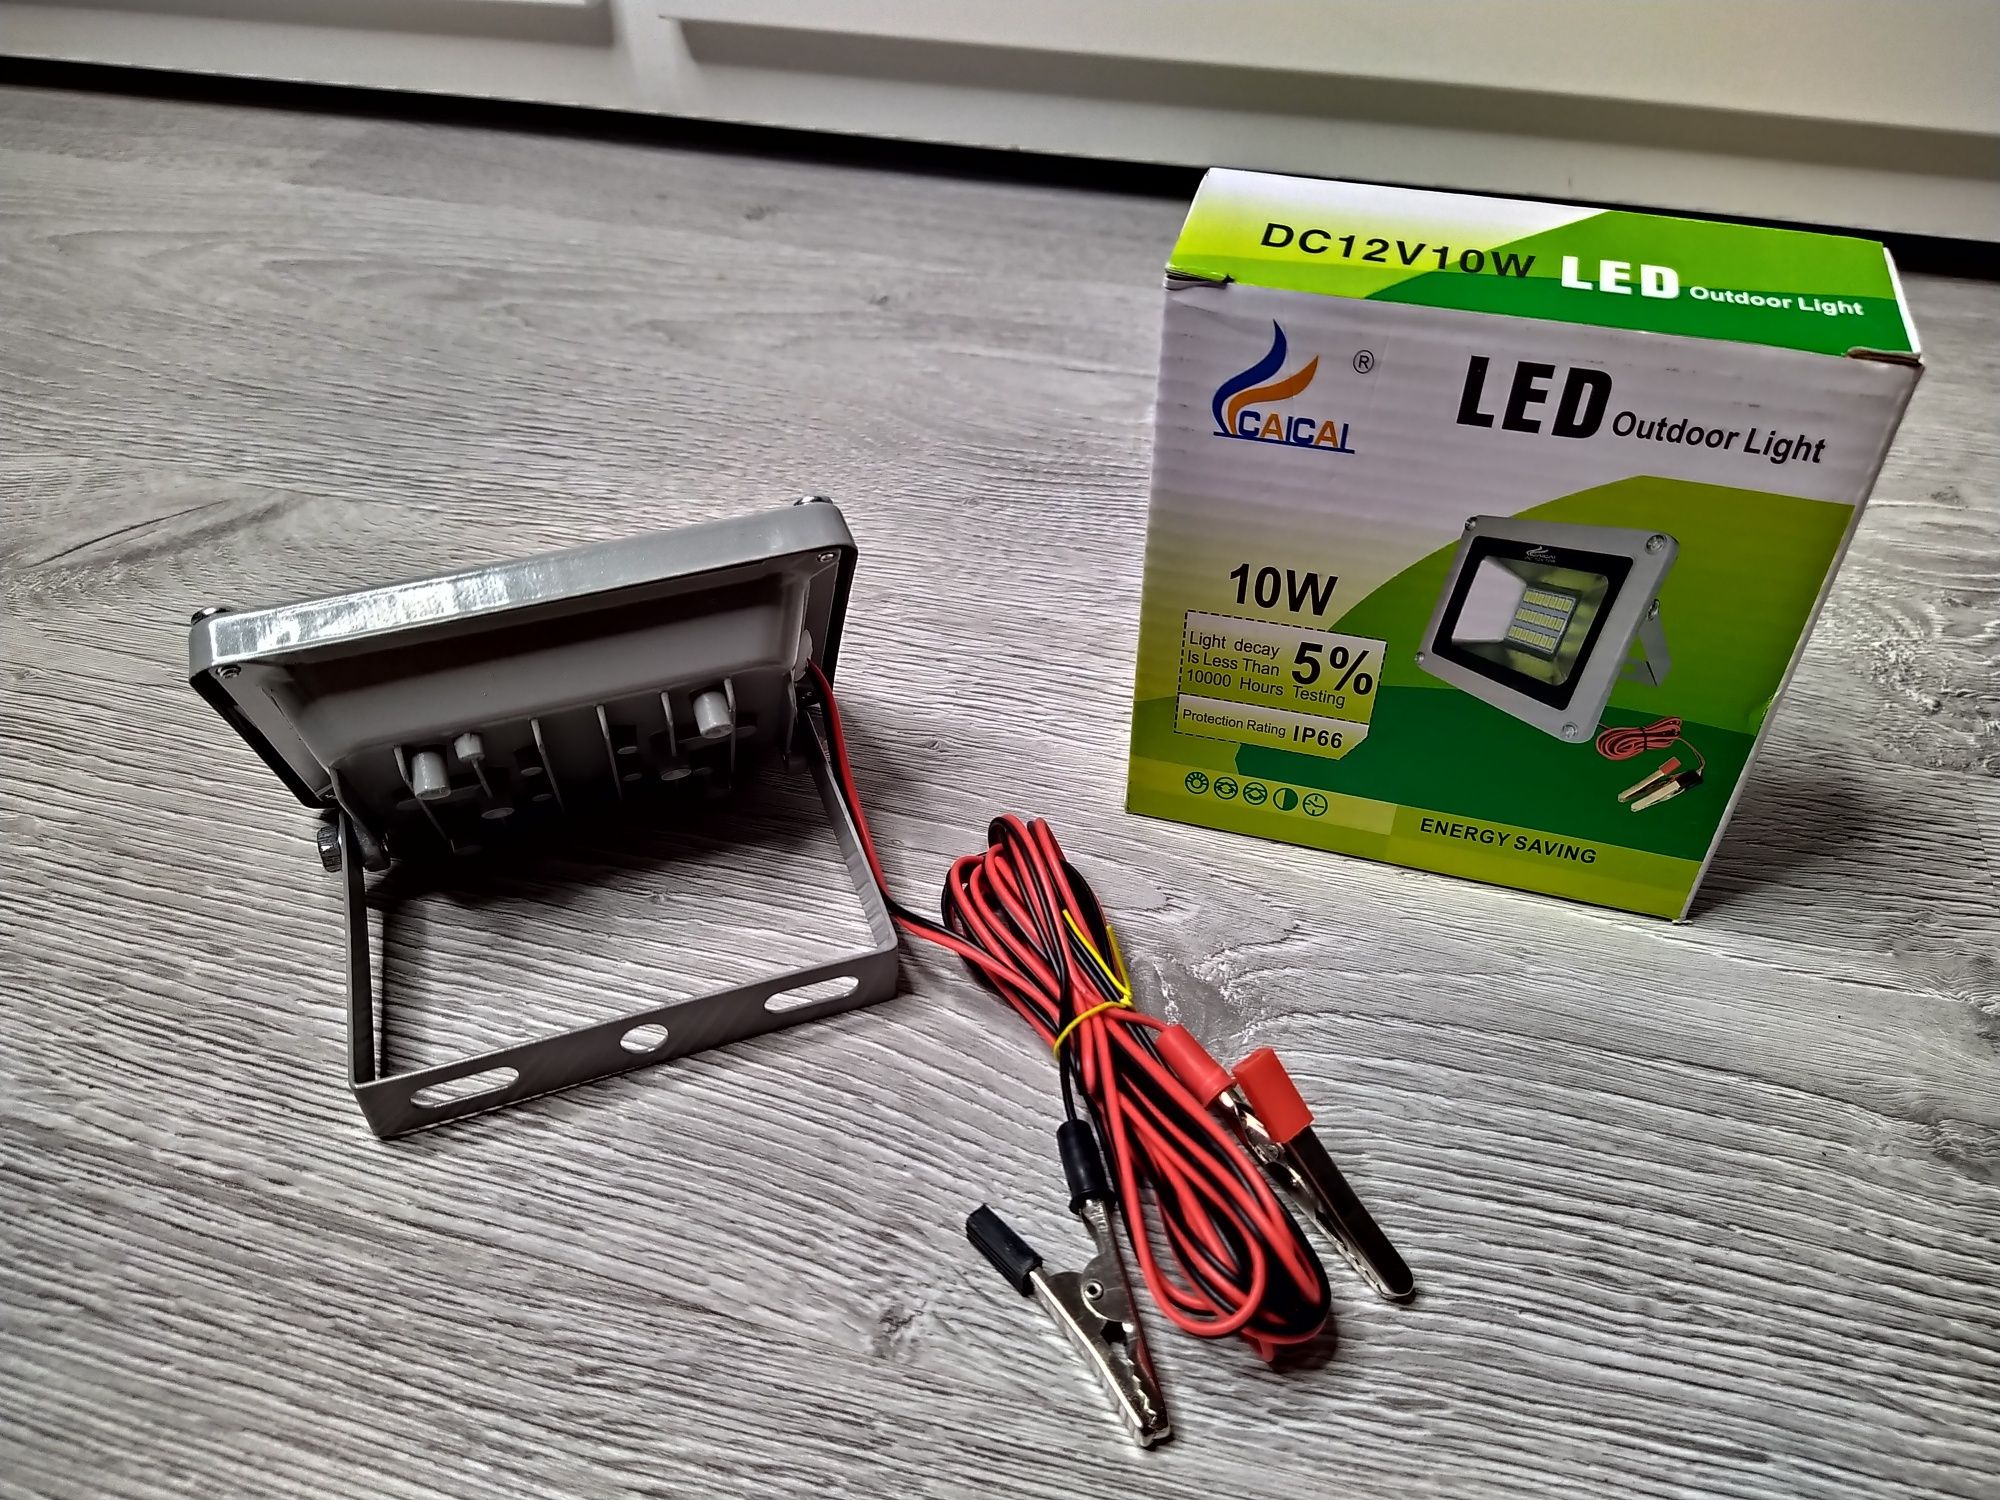 Proiector LED 10W SMD Alimentare 12V pescuit camping NOU!